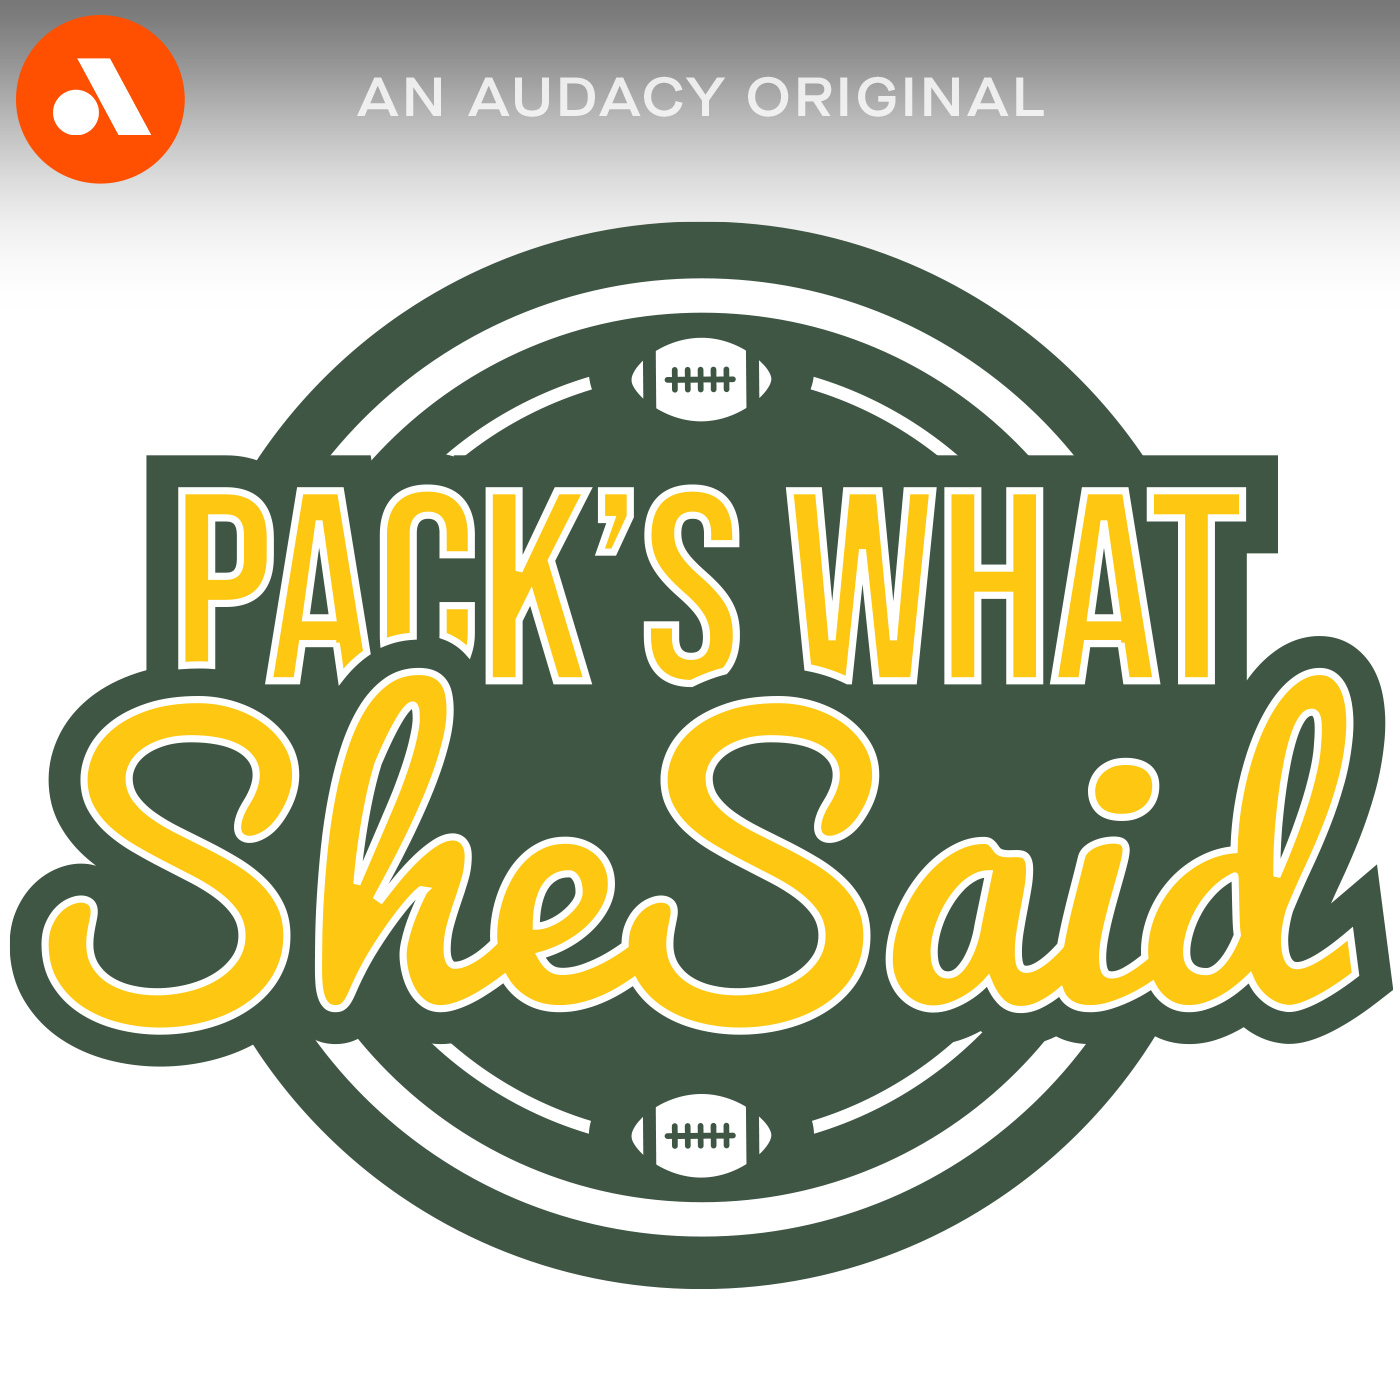 When Will The Packers Defense Gel? | 'Pack's What She Said'